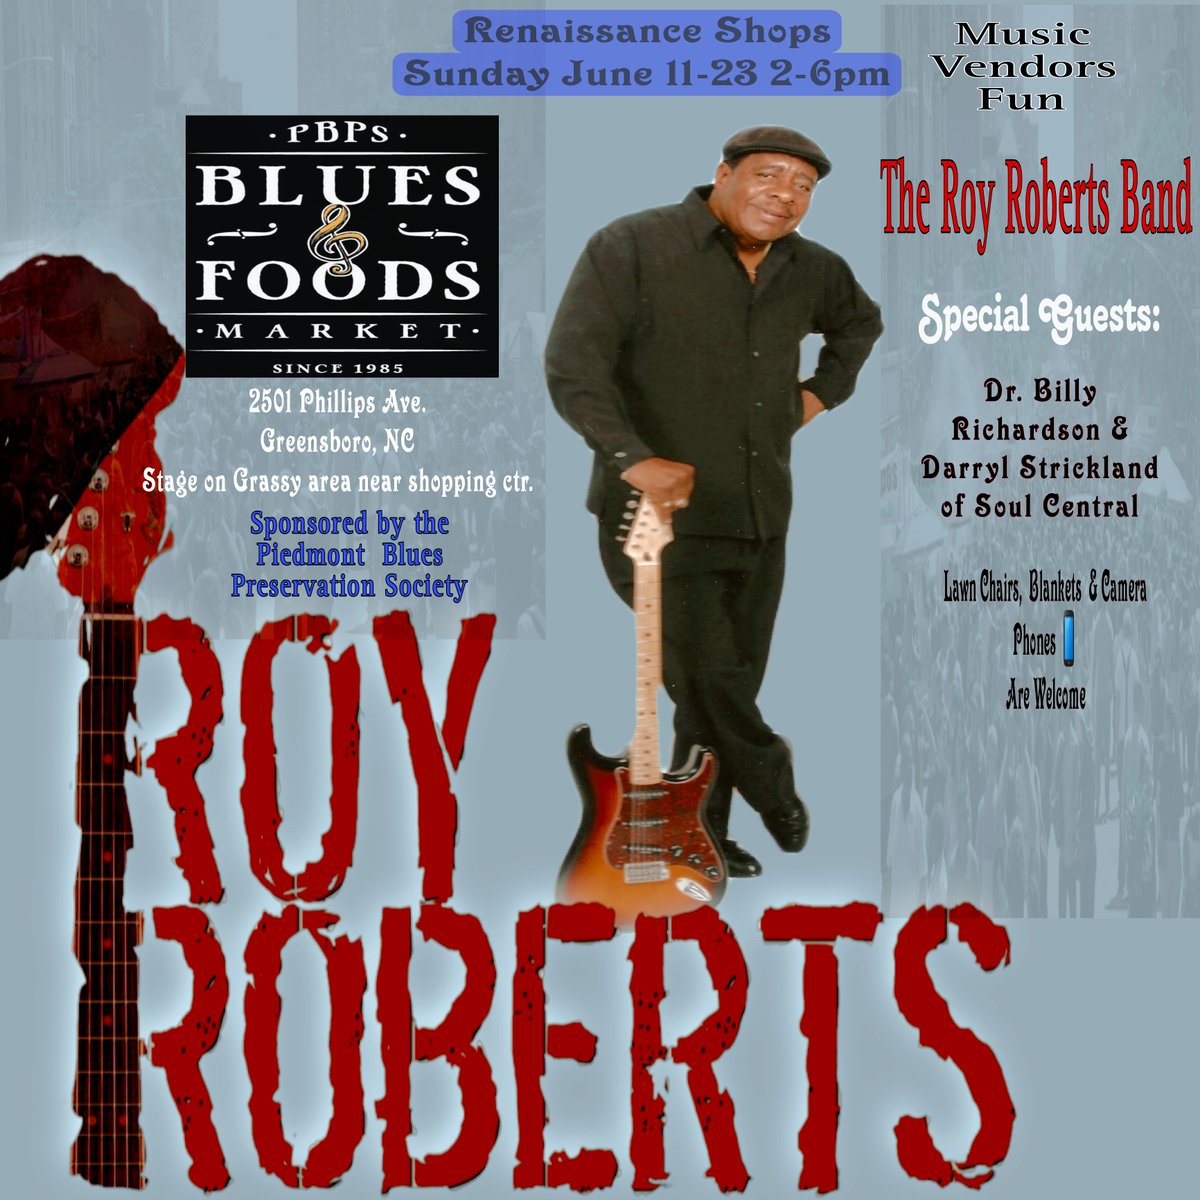 Blues & Food Market. Good Food & Music, Bring your lawn chairs & camera phones, we'll have a good time In Greensboro, NC
#BluesNFood #BluesWithSoul #PhillipsAve #FoodVendors #RoyRobertsBand #SpecialGuests #PBPS #BluesPreservation #SoulCentral